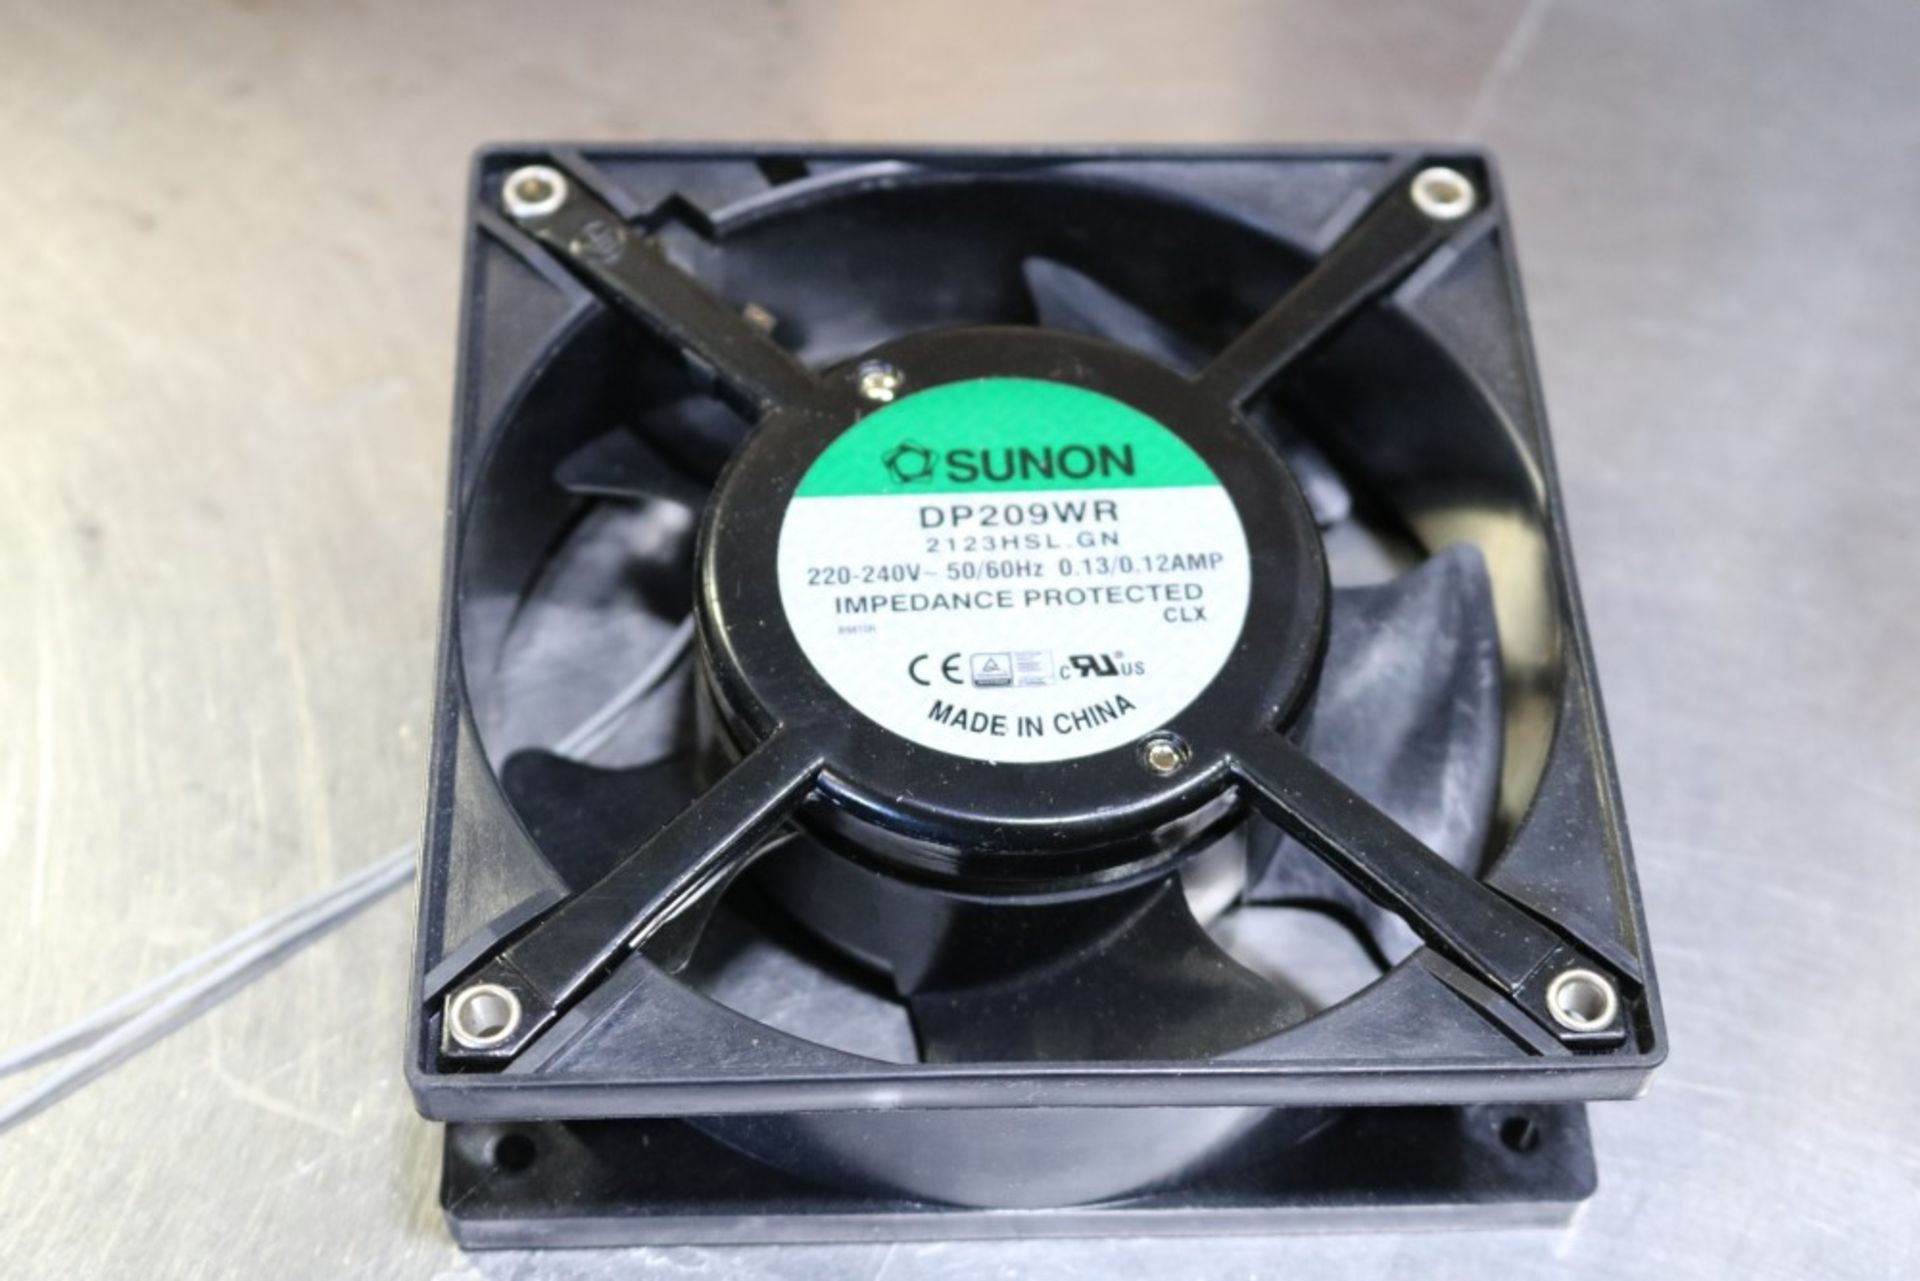 (24) Sunon Equipment Cooling Fans DP209WR 220-240V Impedence Protected - Image 2 of 6